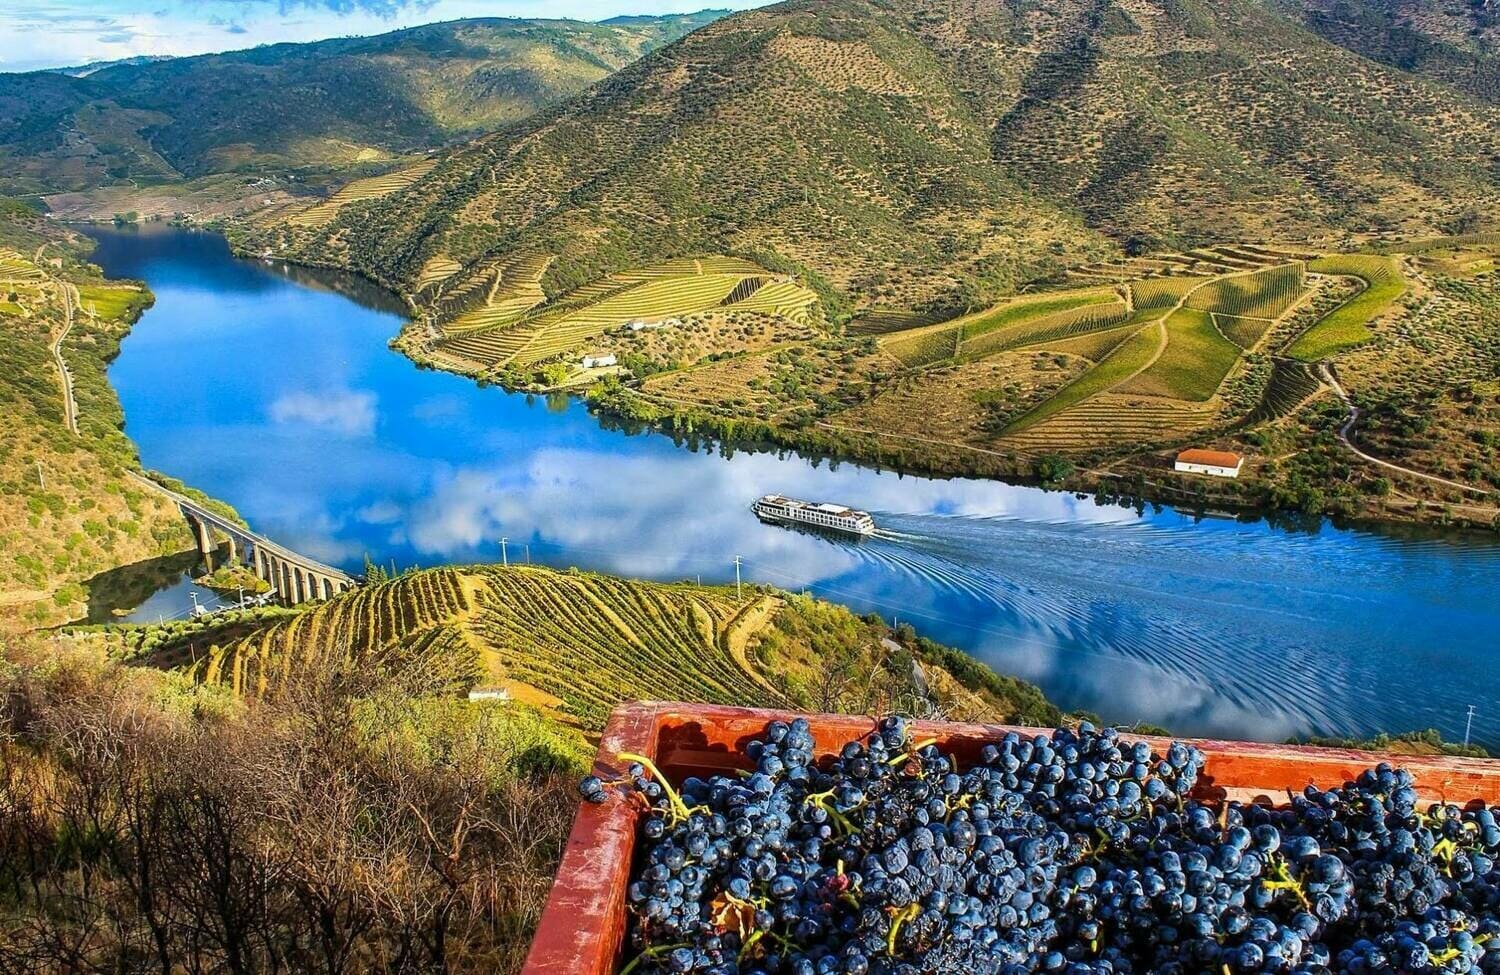 Mountain landscape with river and vineyards